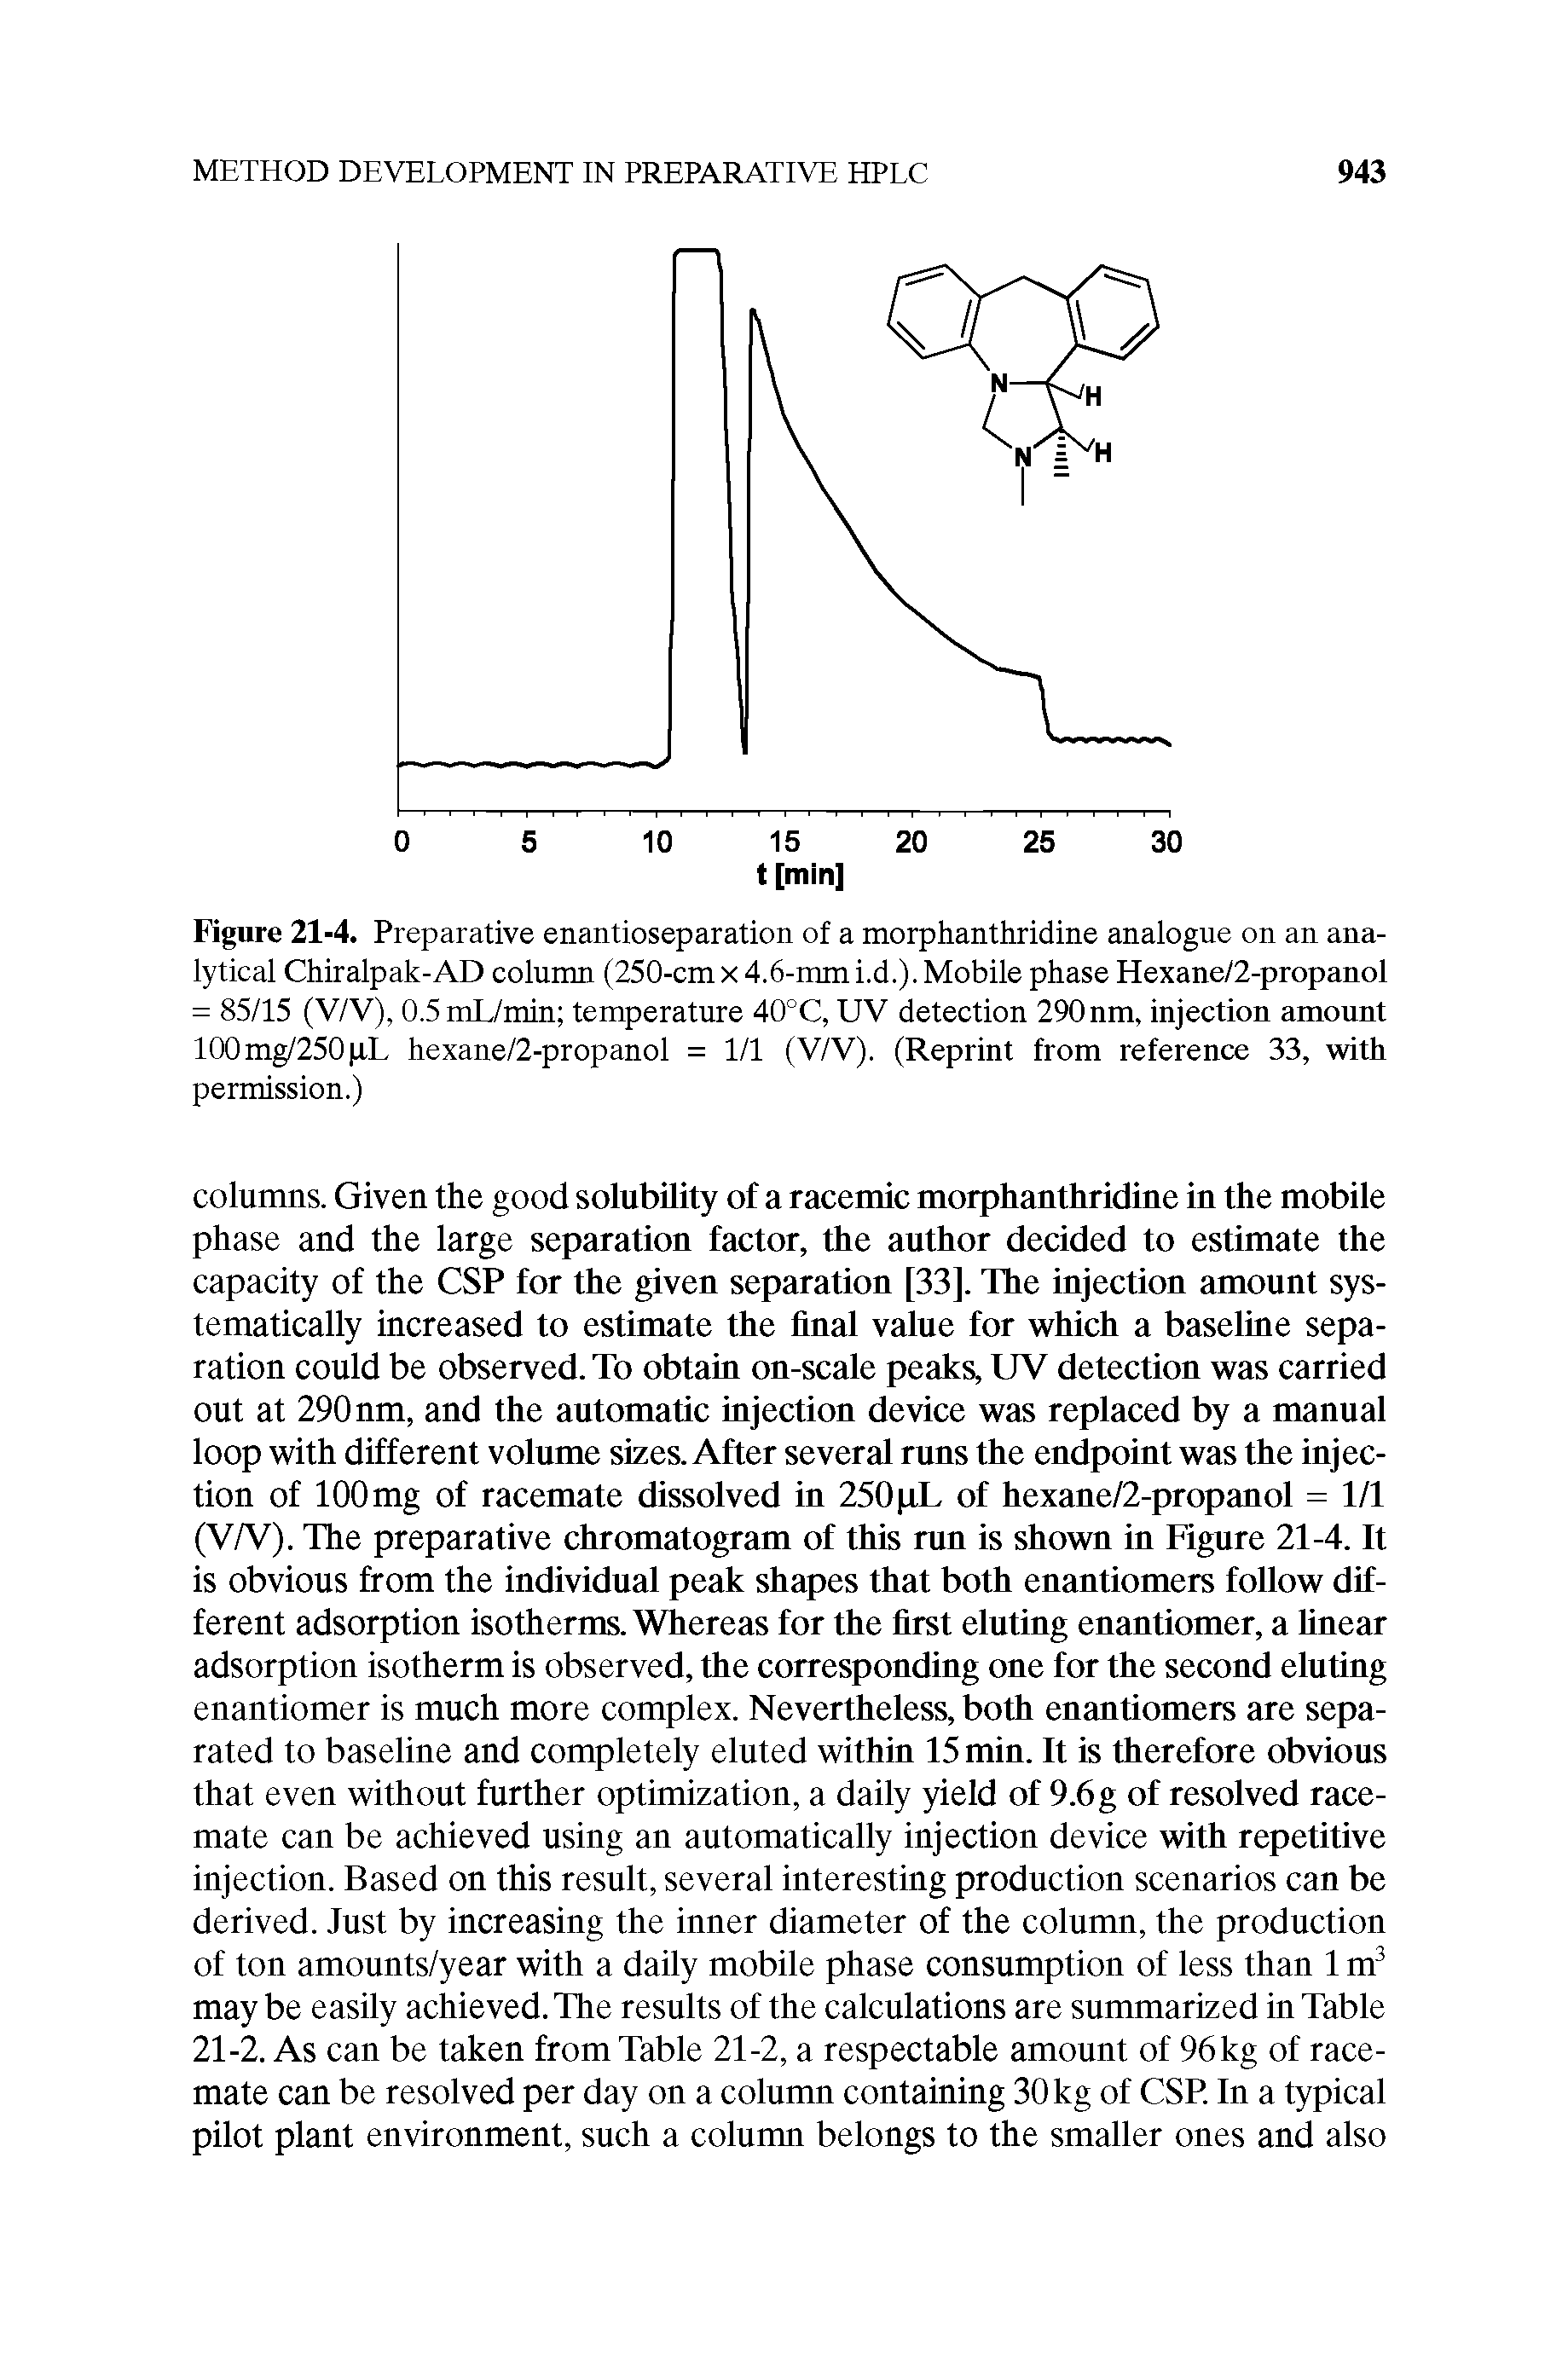 Figure 21-4. Preparative enantioseparation of a morphanthridine analogue on an analytical Chiralpak-AD column (250-cm x 4.6-mm i.d.). Mobile phase Hexane/2-propanol = 85/15 (V/V), 0.5mL/min temperature 40°C, UV detection 290 nm, injection amount 100mg/250 xL hexane/2-propanol = 1/1 (V/V). (Reprint from reference 33, with permission.)...